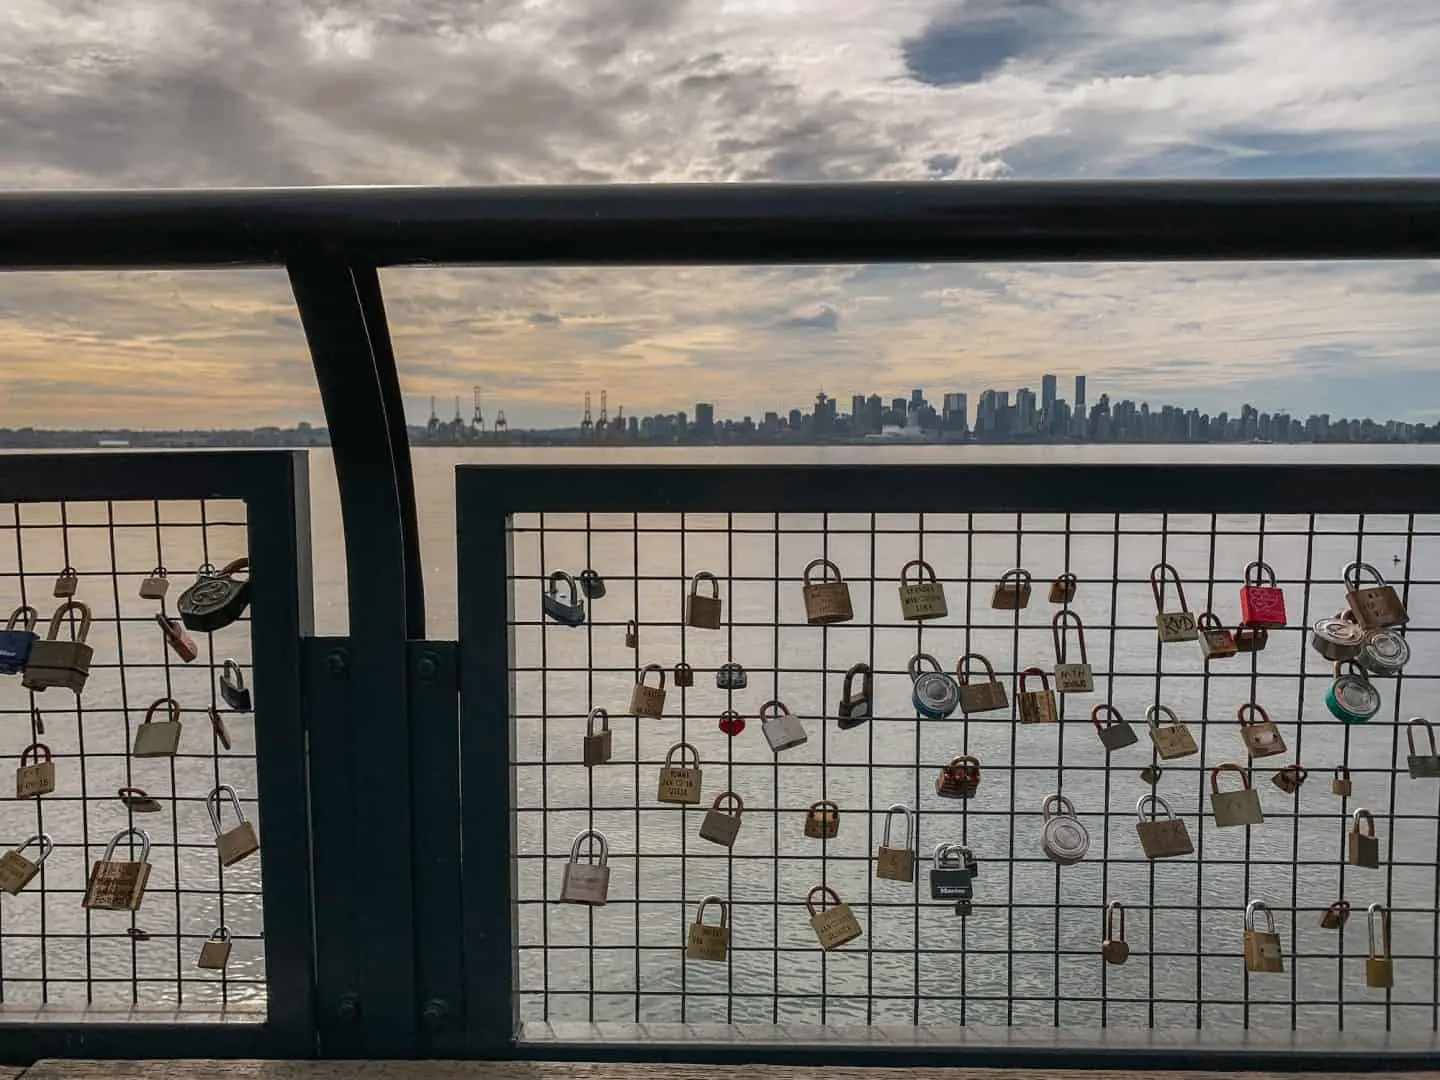 Love locks at the Lonsdale Quay in North Vancouver, British Columbia